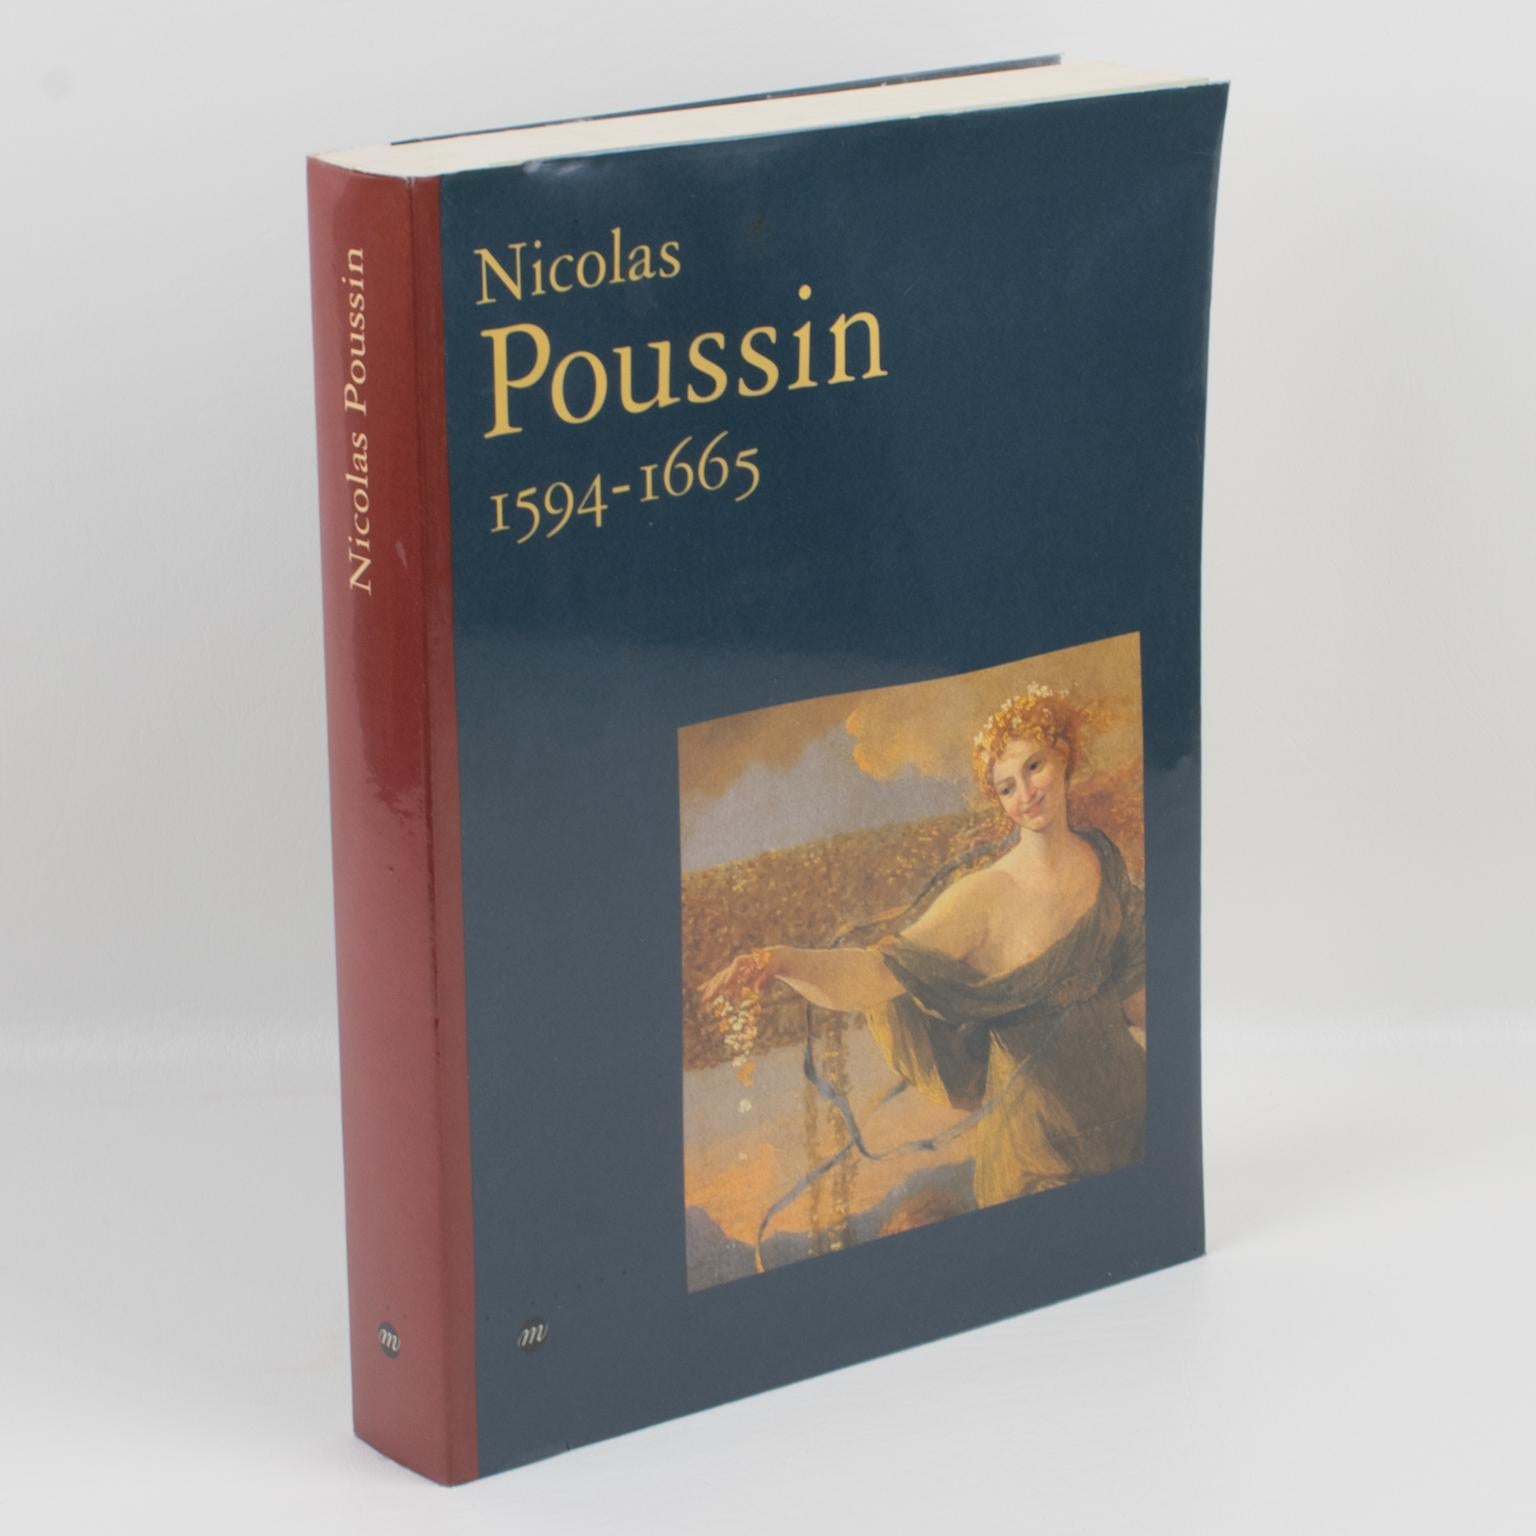 Renaissance Nicolas Poussin, French Book by Pierre Rosenberg, 1994 For Sale